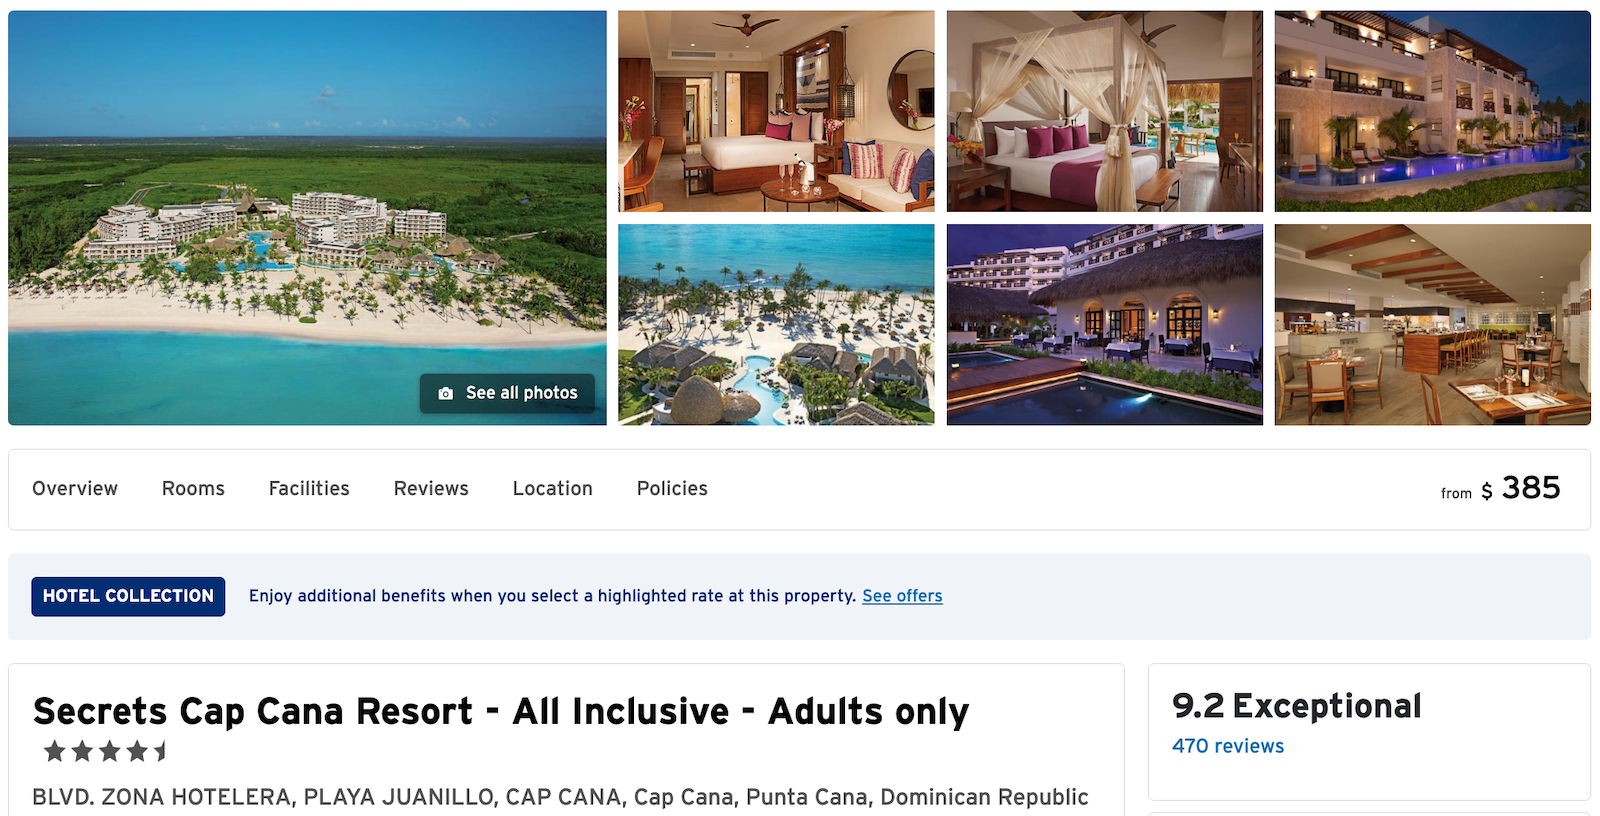 photos and general information for a hotel booking at an all-inclusive property with Citi's Hotel Collection